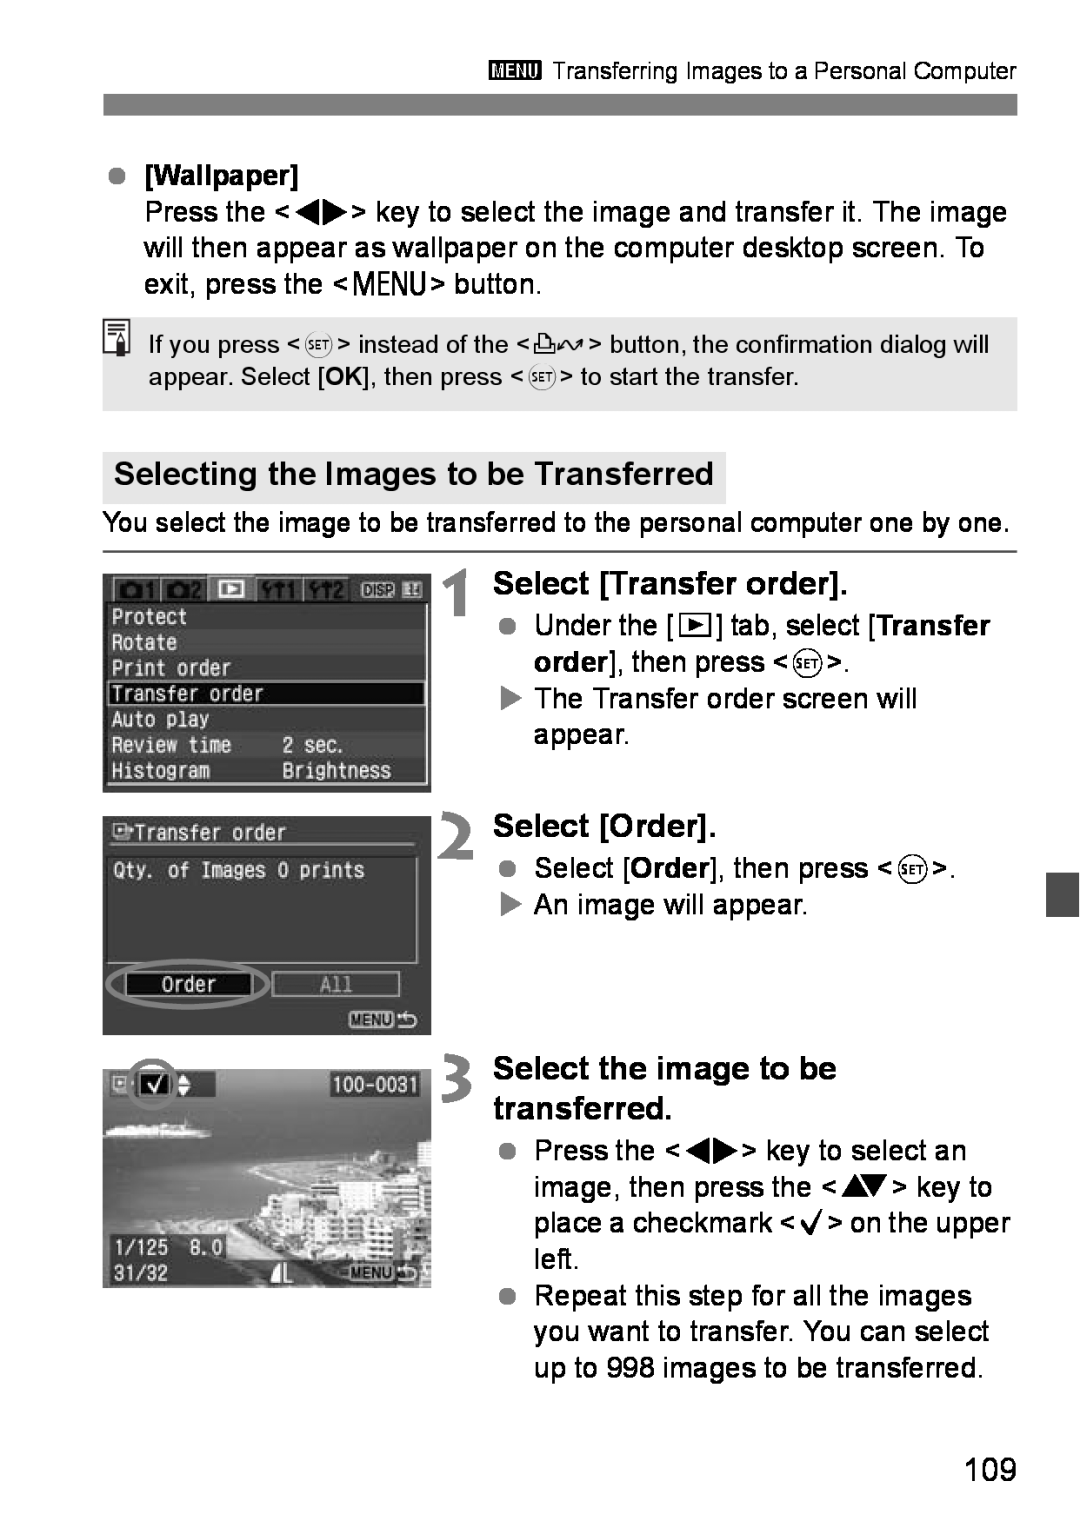 Canon EOS DIGITAL REBEL XTI Selecting the Images to be Transferred, Select Transfer order, Select Order, Wallpaper 